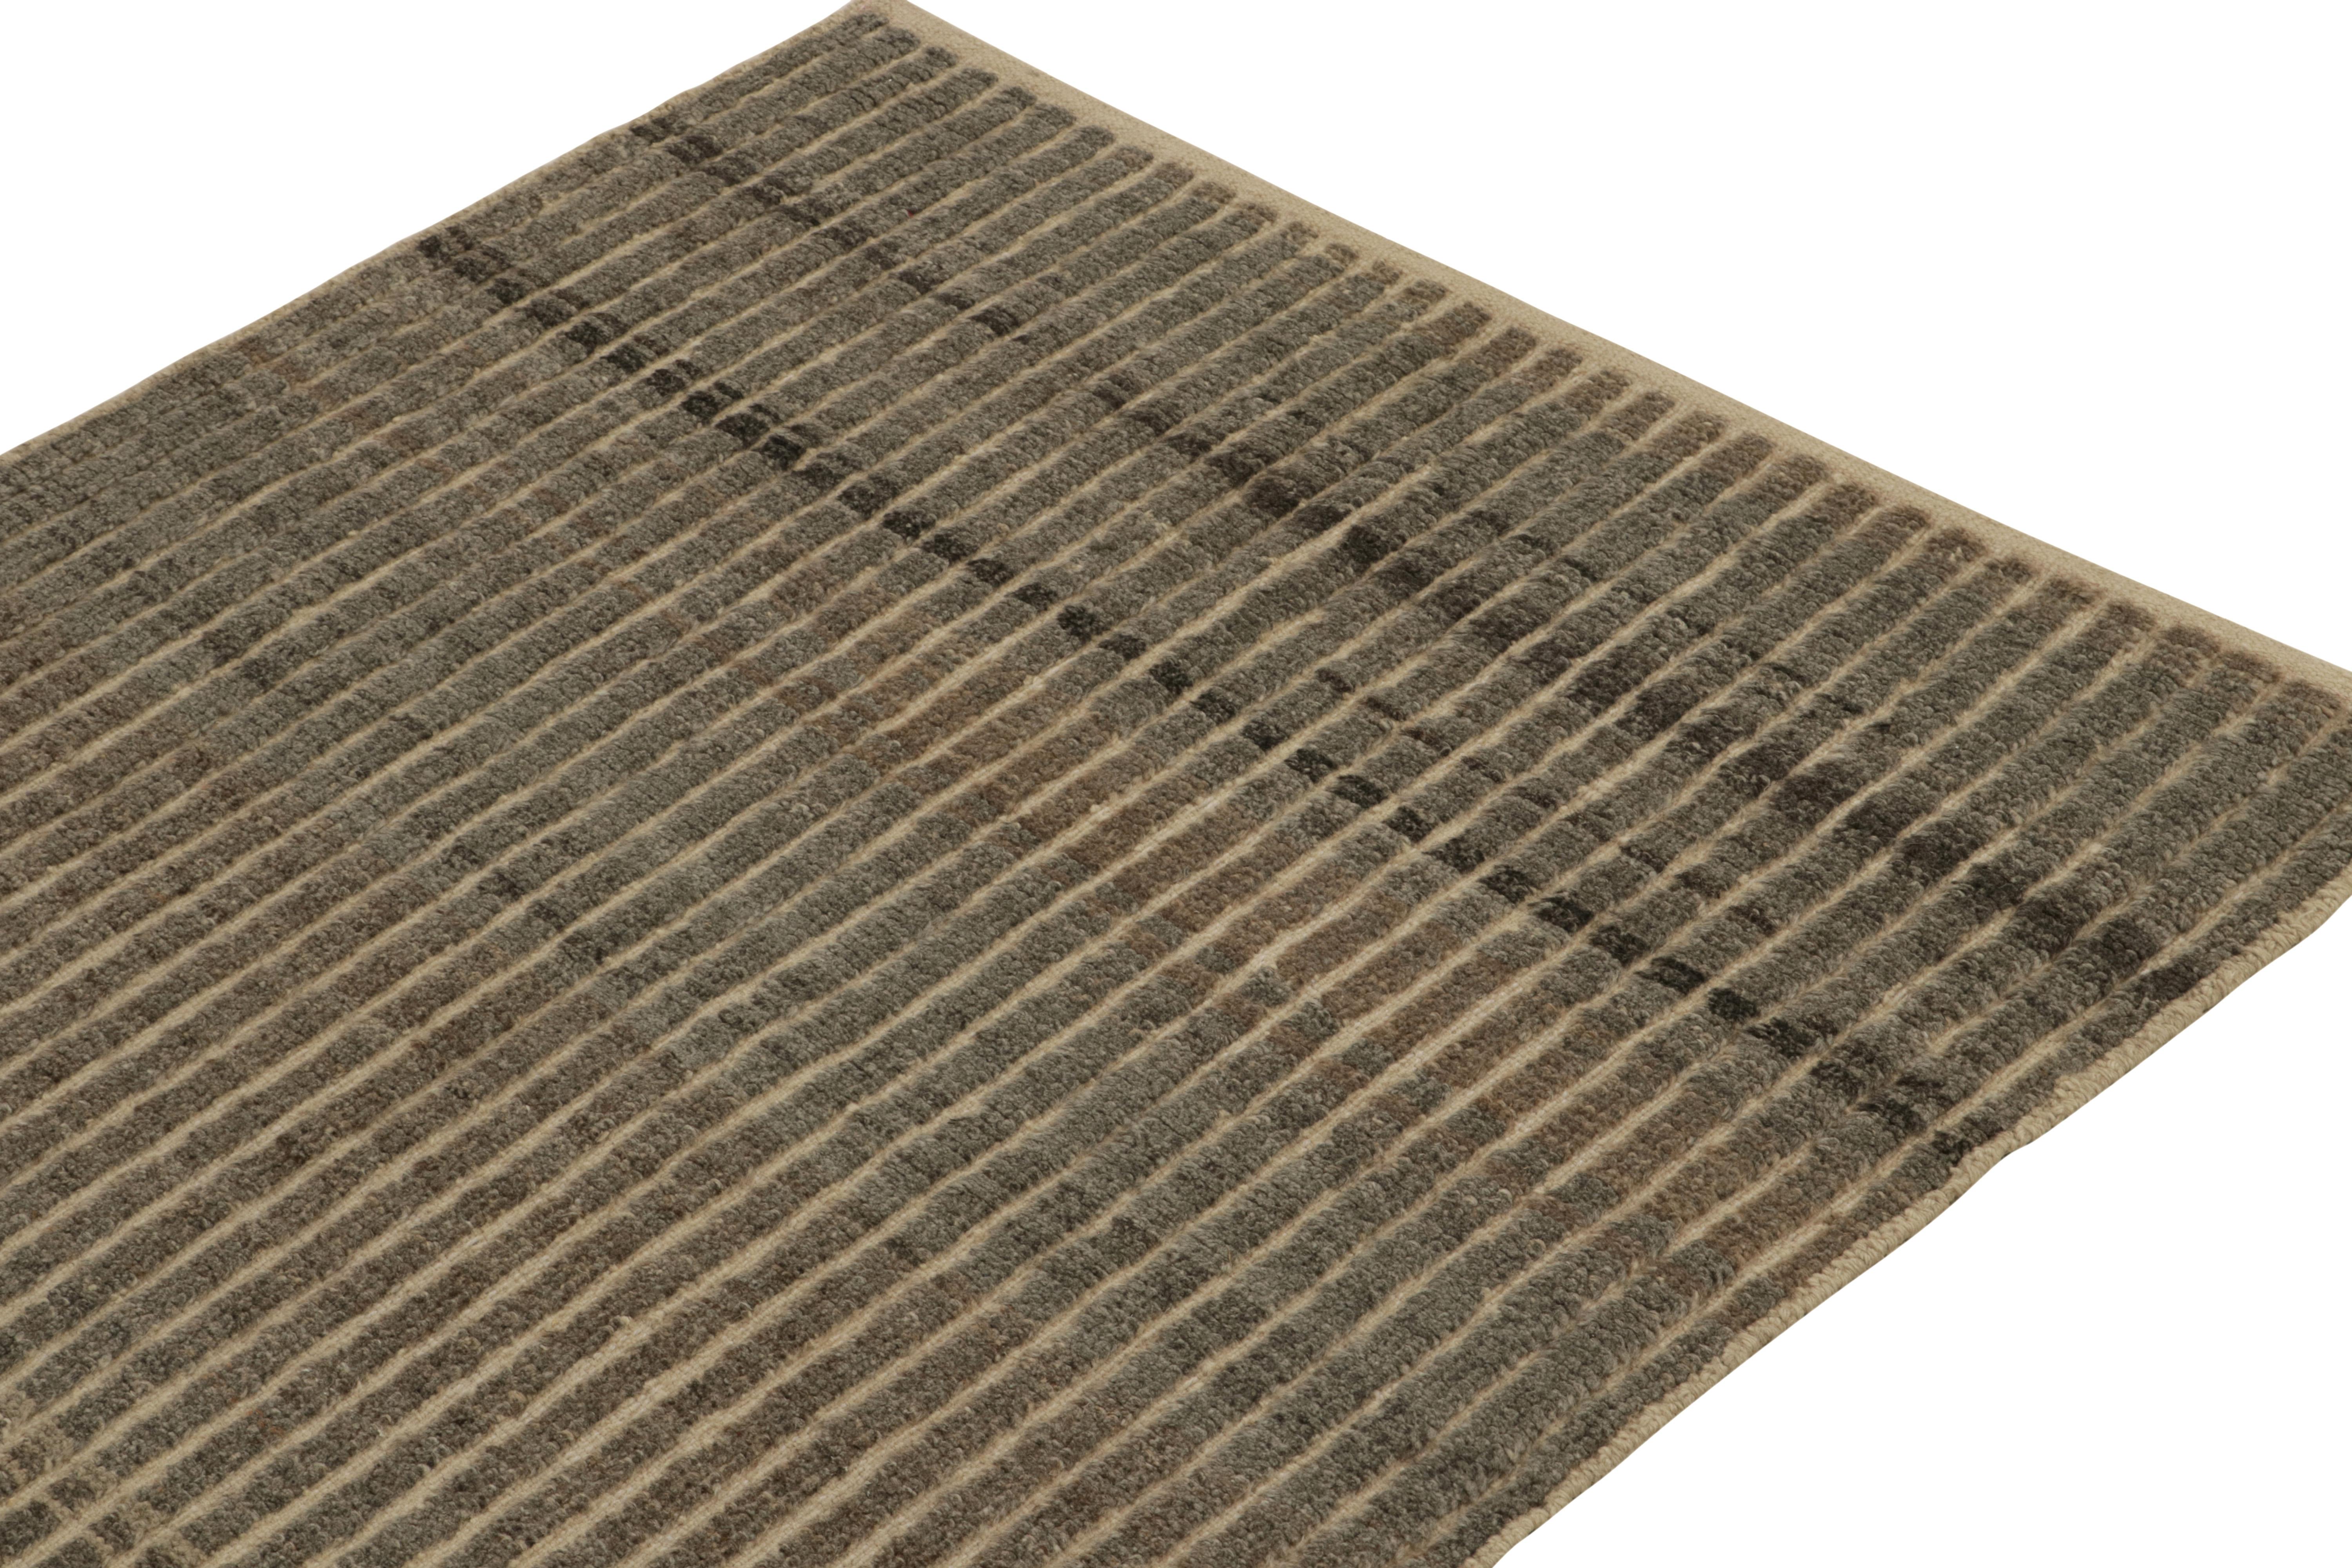 Rug & Kilim's Moroccan Style Runner in Beige-Brown, Gray Stripe Pattern In New Condition For Sale In Long Island City, NY